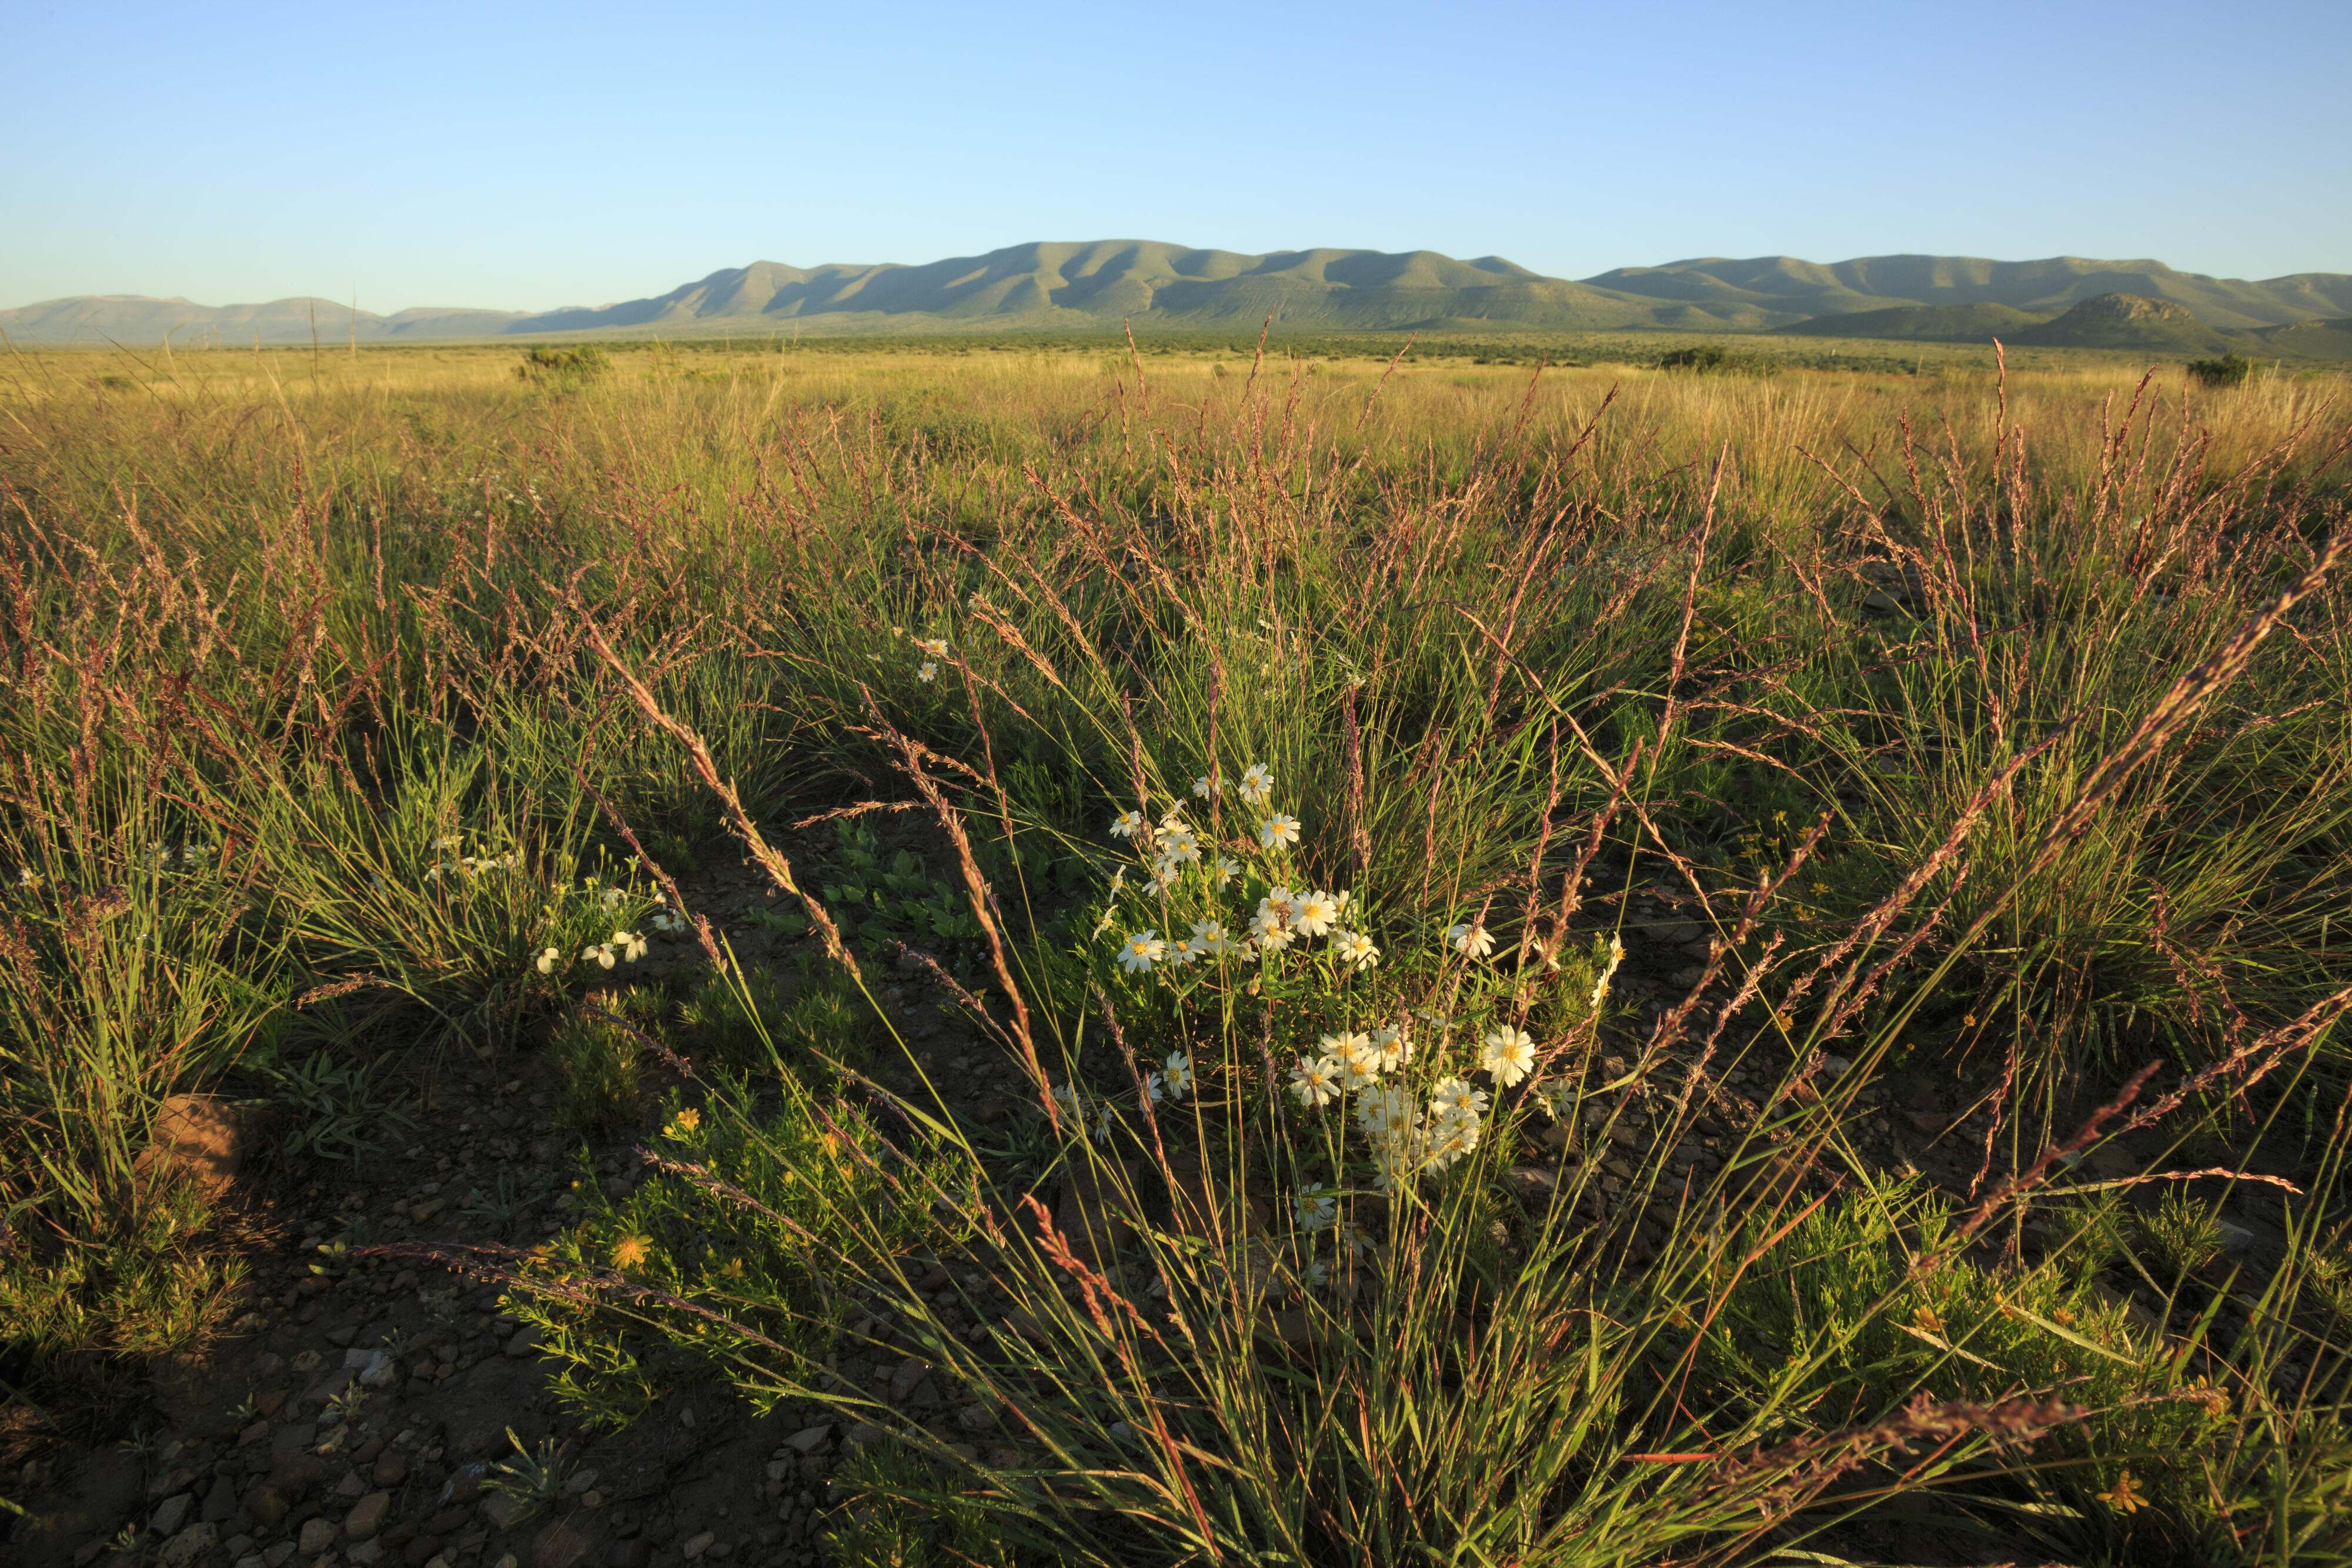 An open field of tall grass with red and white flowers.